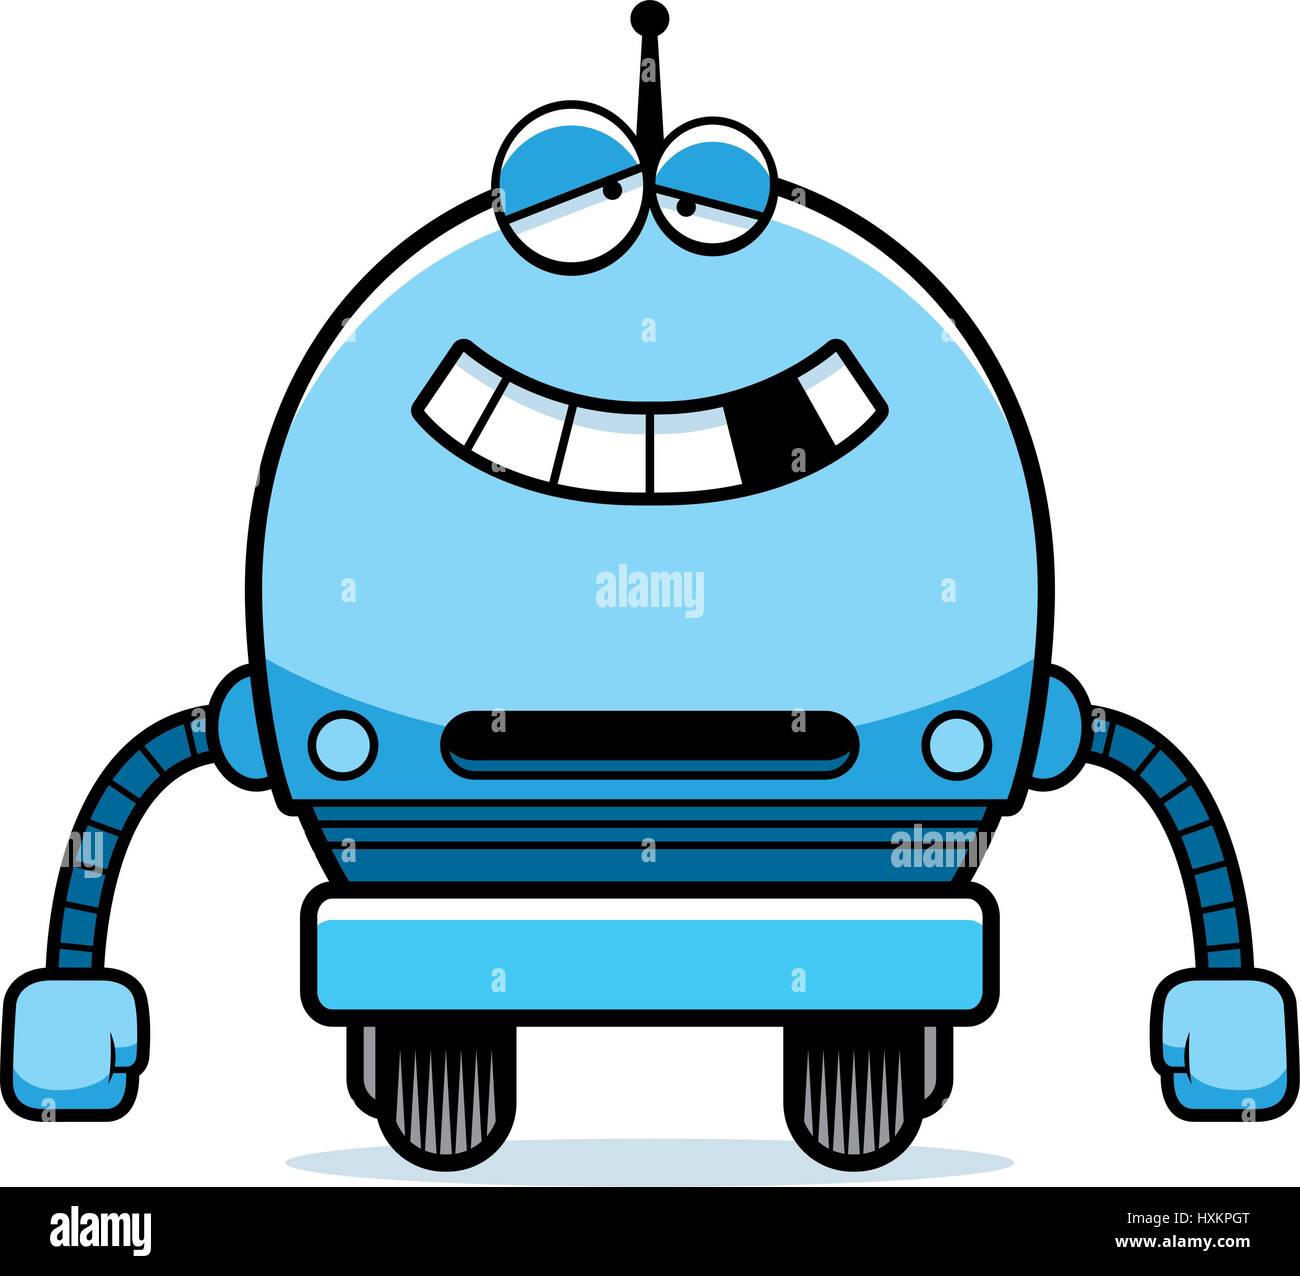 A cartoon illustration of a malfunctioning male blue robot. Stock Vector